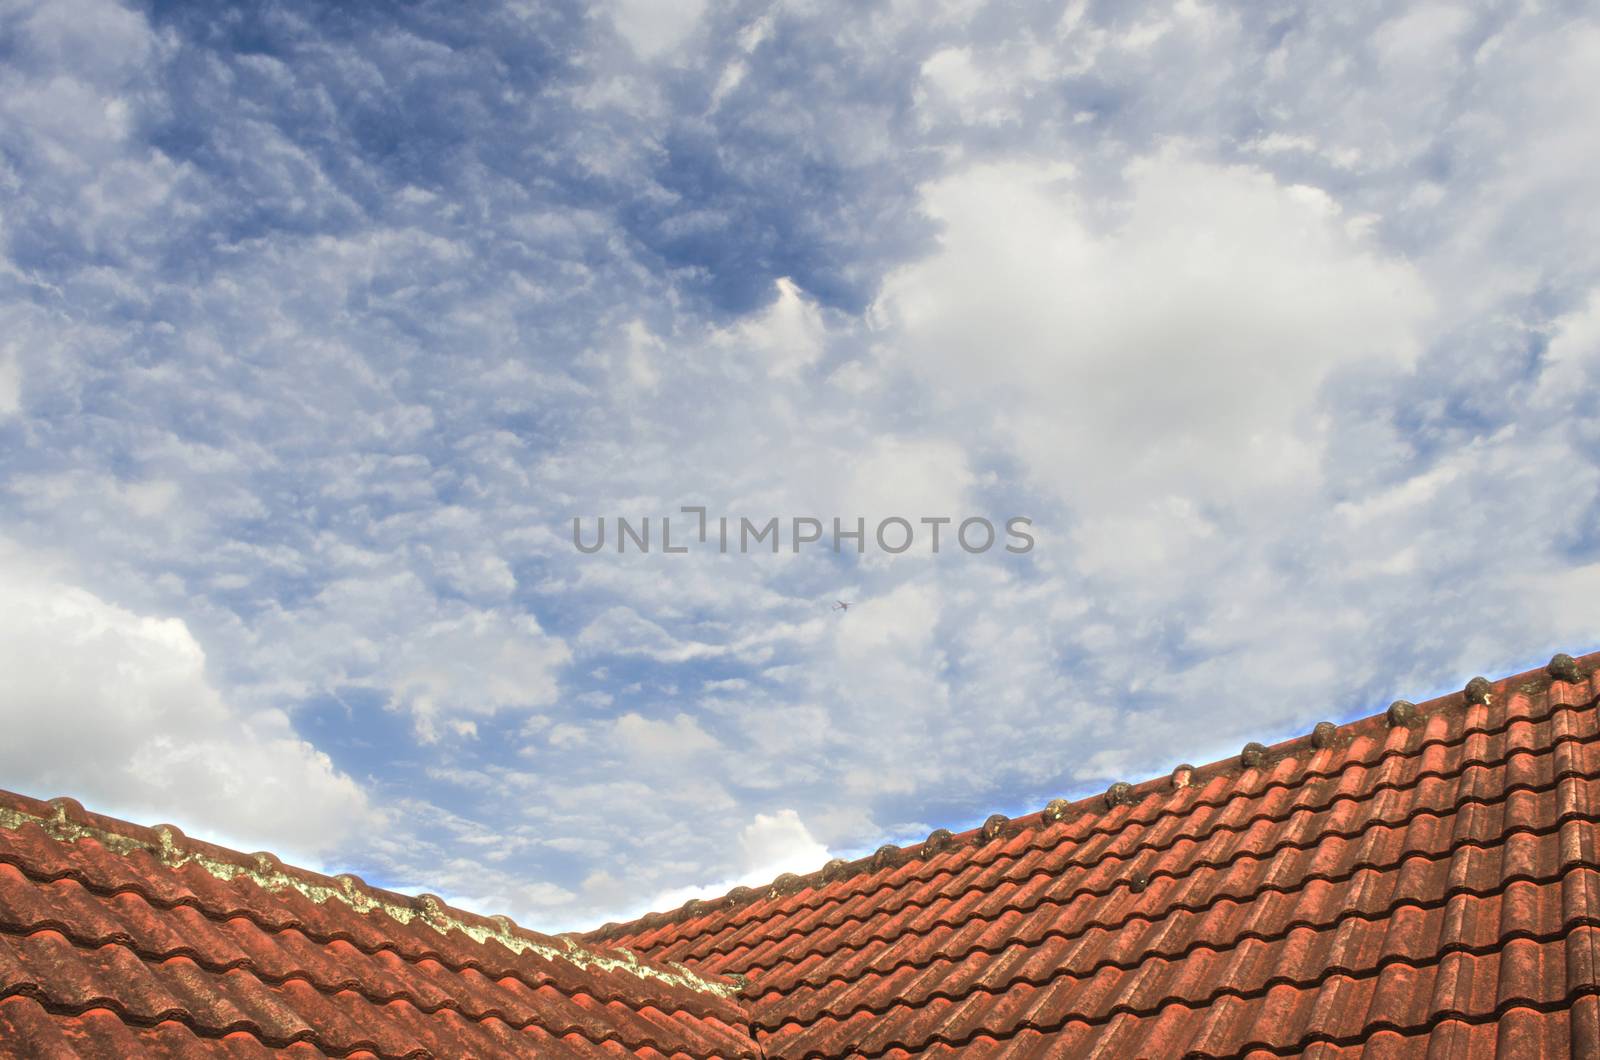 The Tiled Roof with Fluffy Cloud Blue Sky 105